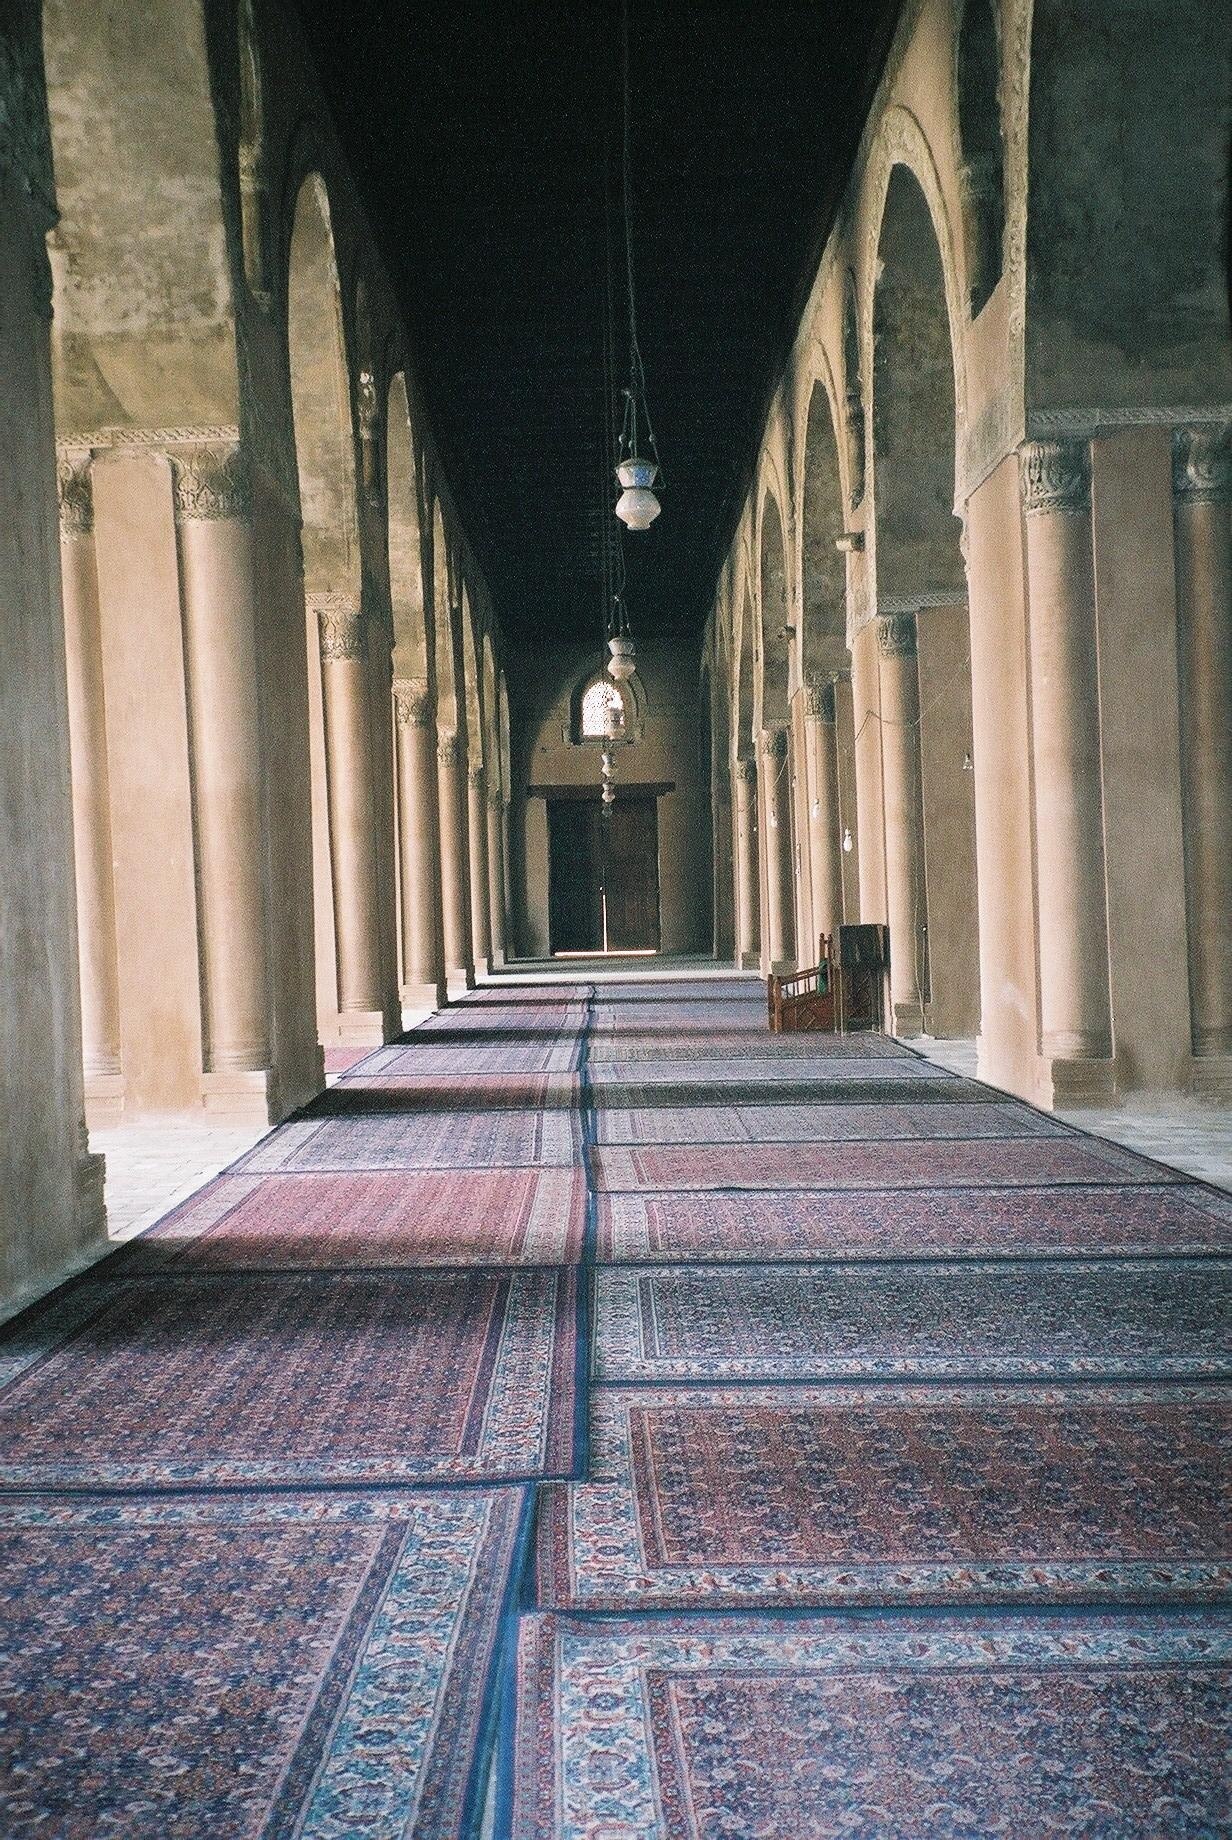 Said to be the oldest mosque in Cairo still in its original form and the largest mosque in Cairo. The carpets were laid out just prior to prayer time. Tourists were welcome but you'll go barefoot and women need to cover their heads and be modestly dressed.